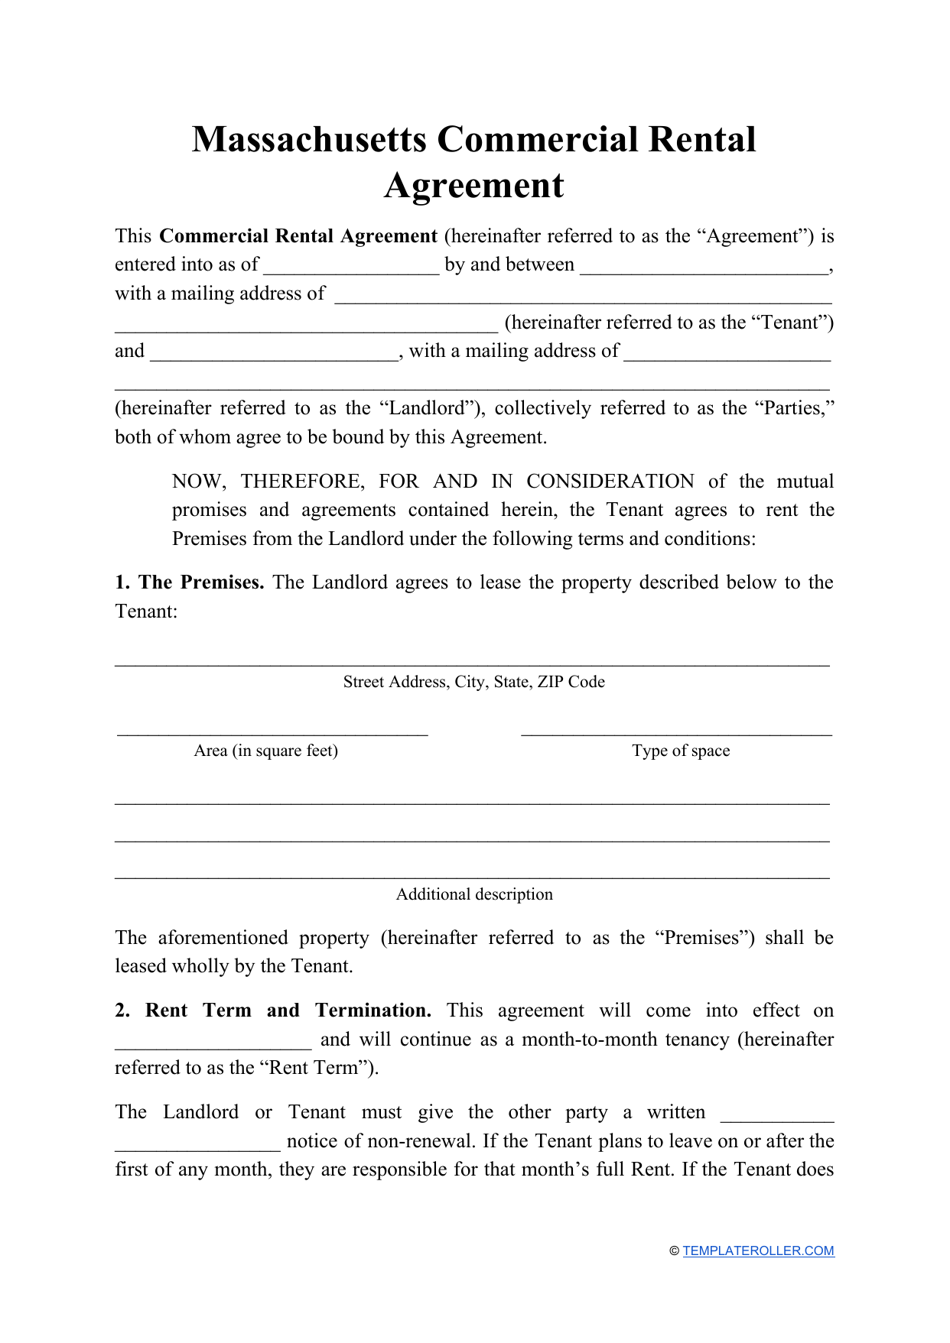 Commercial Rental Agreement Template - Massachusetts, Page 1